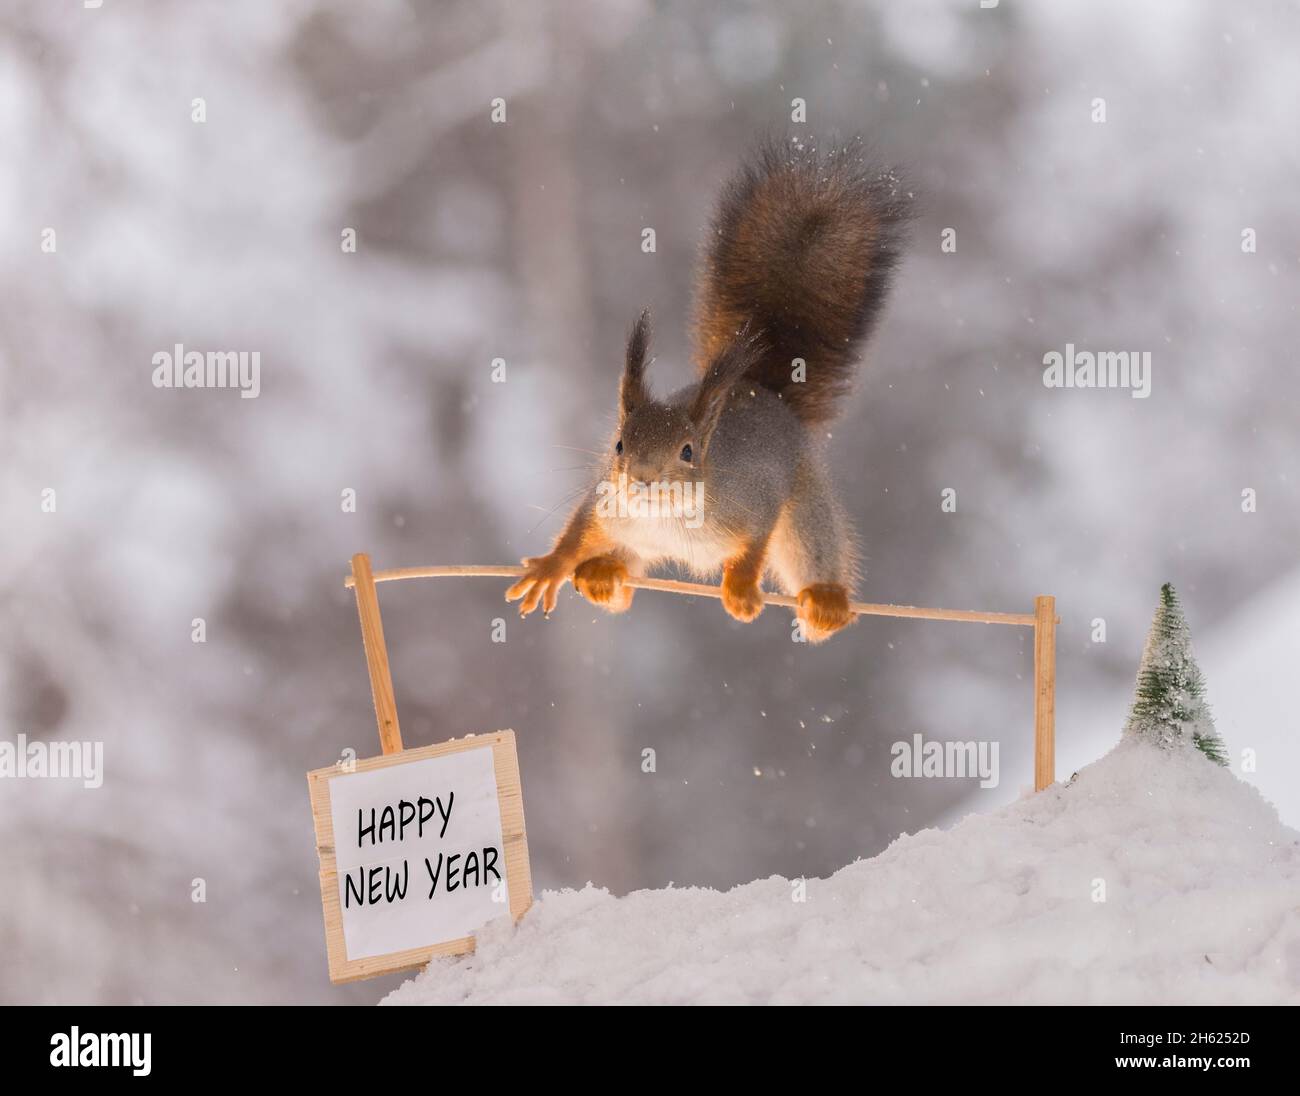 red squirrel with a new year sign Stock Photo